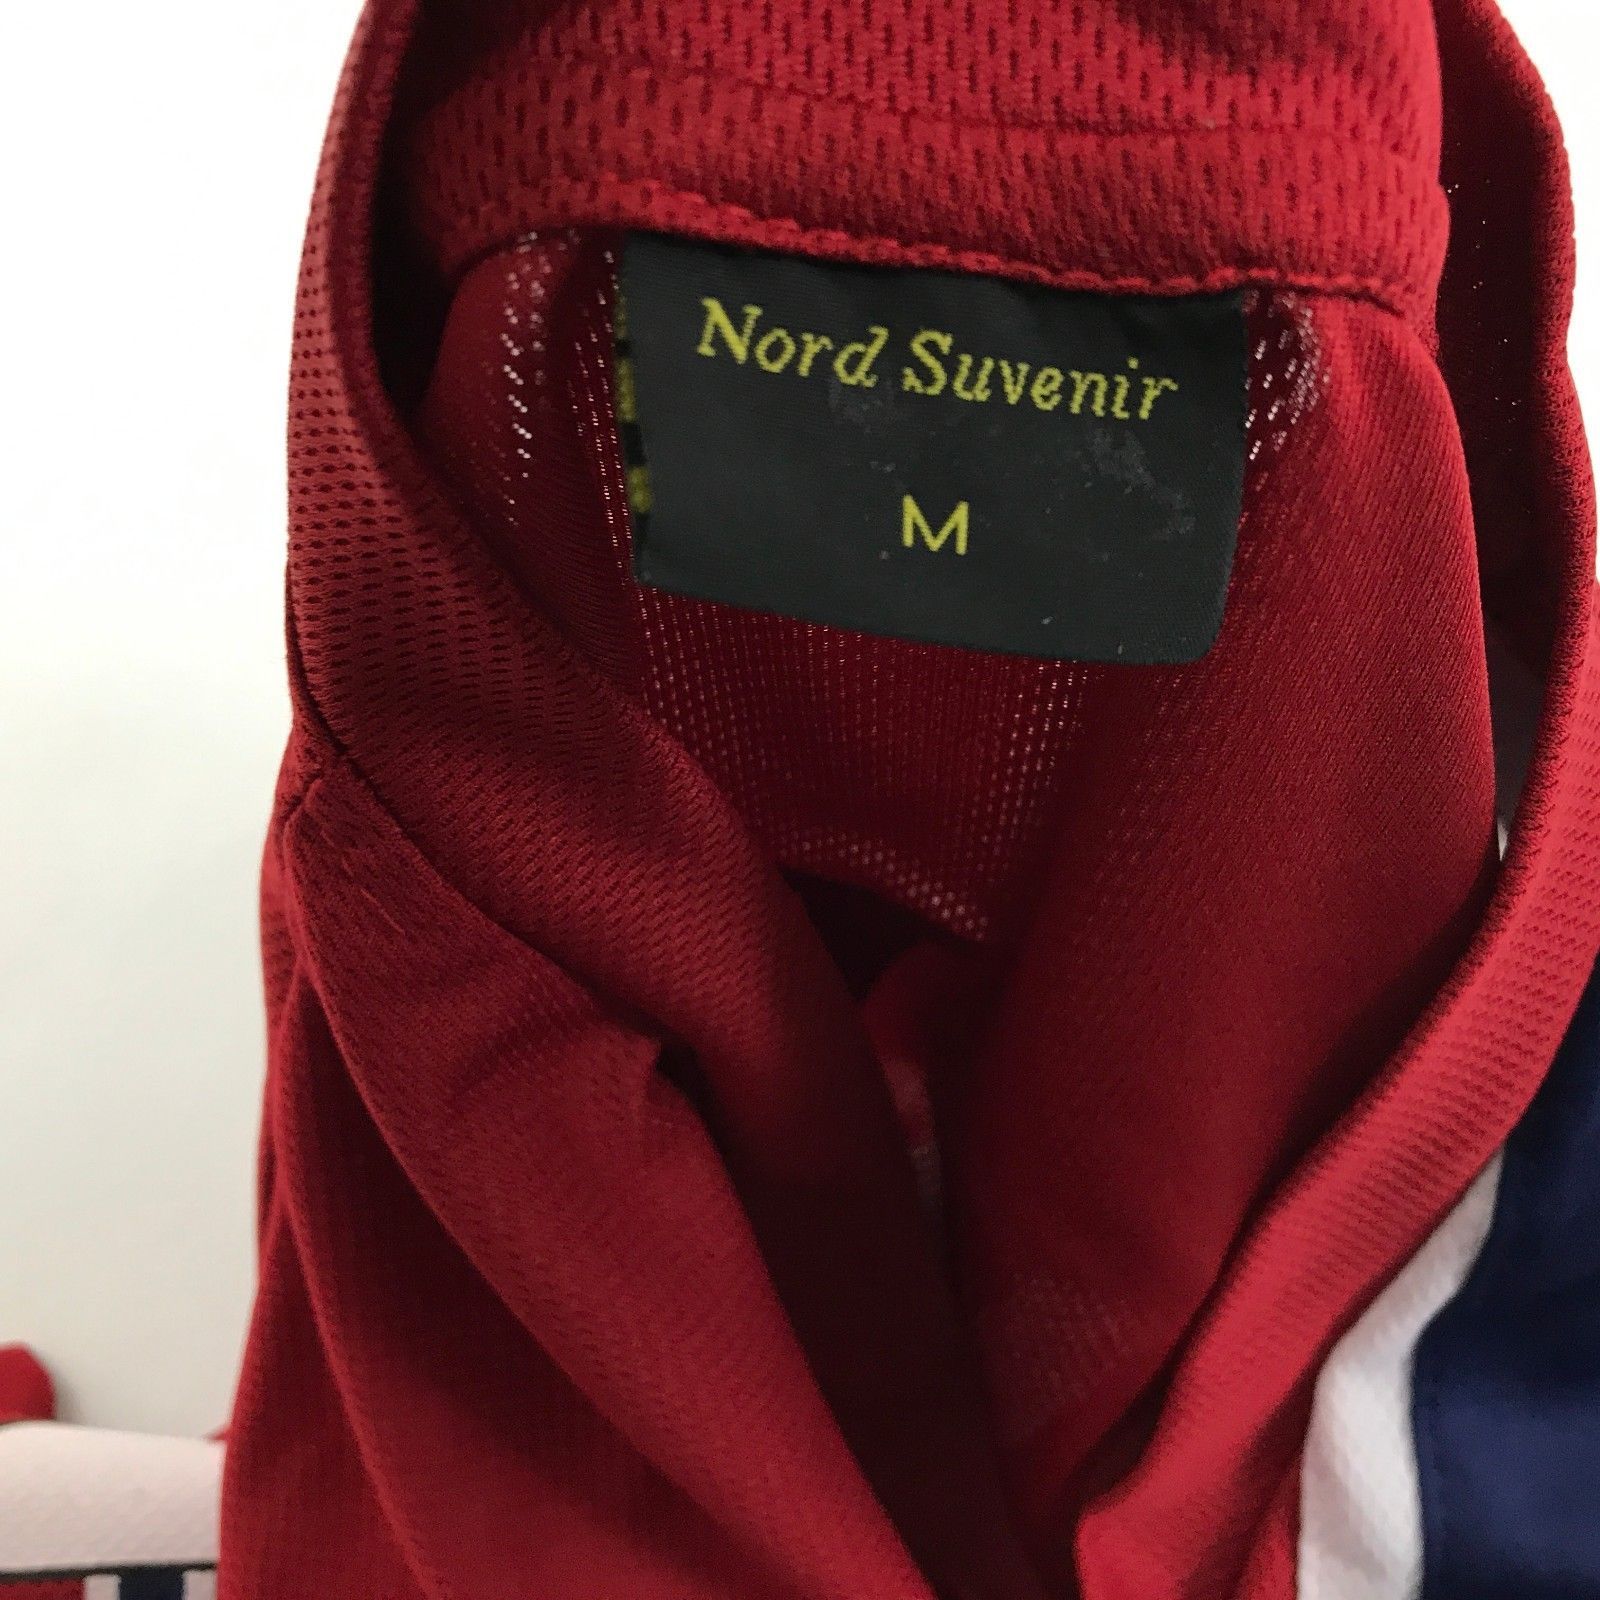 Norge Norway Nord Suvenir Shirt Soccer Jersey Adult Red Size Medium M V ...